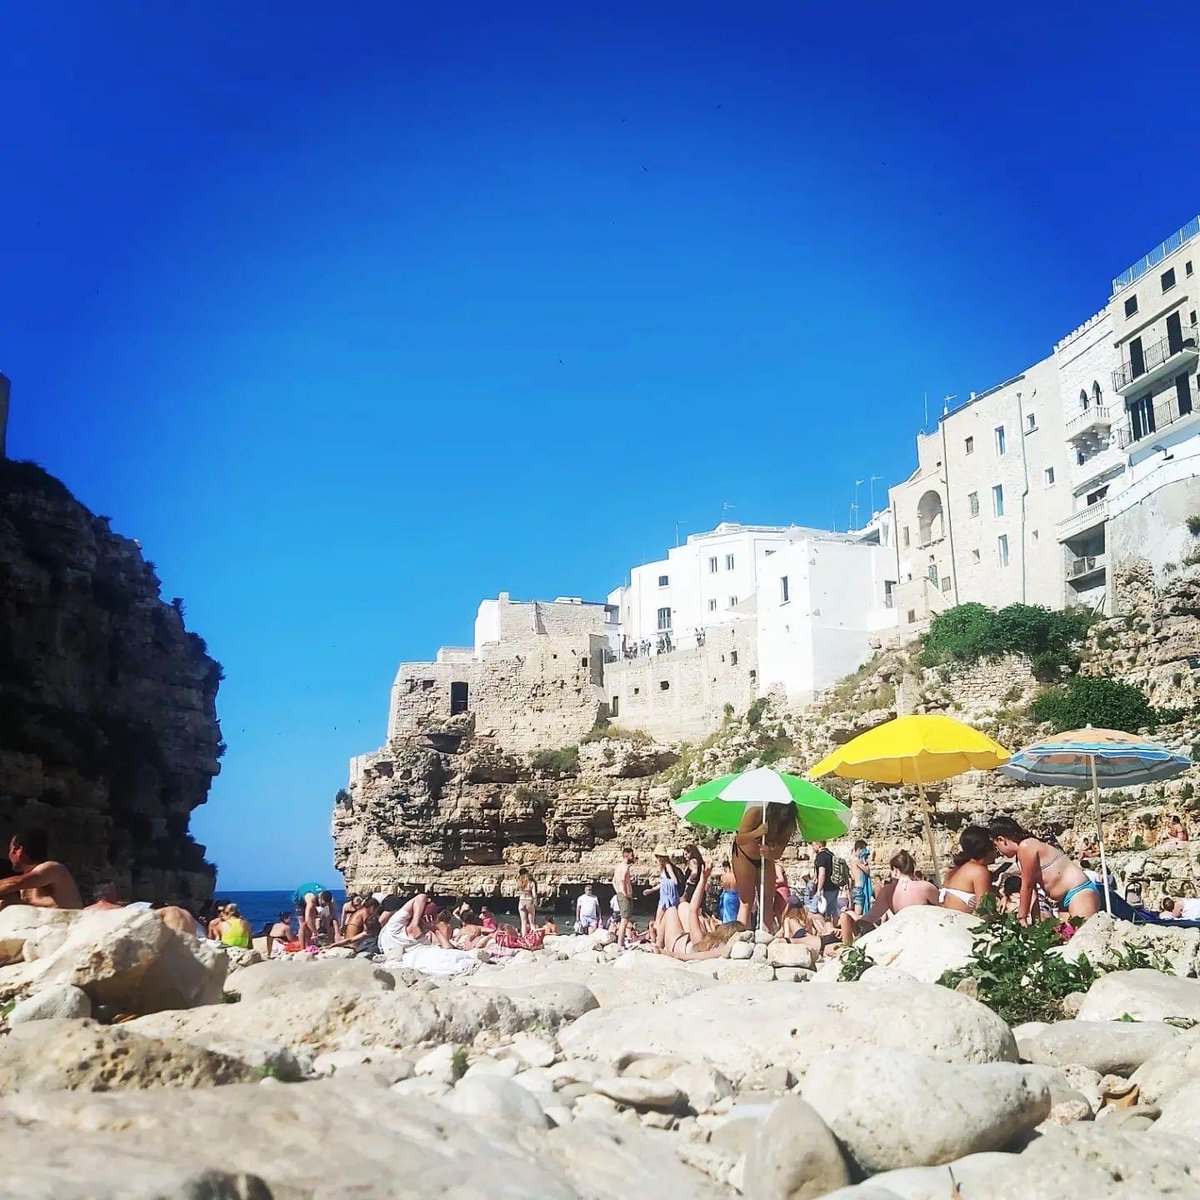 Grotte di Polignano a mare 

#explore #traveller #trip #vacay #nature #bythebeach #touring #bluewater #cliffs #travelbuddy #attraction #italy #polignanoamare #feelingenergized #sand #stones #seacaves #seascape #landscape #clickthemoment #photoframe #photomemories #createexplore